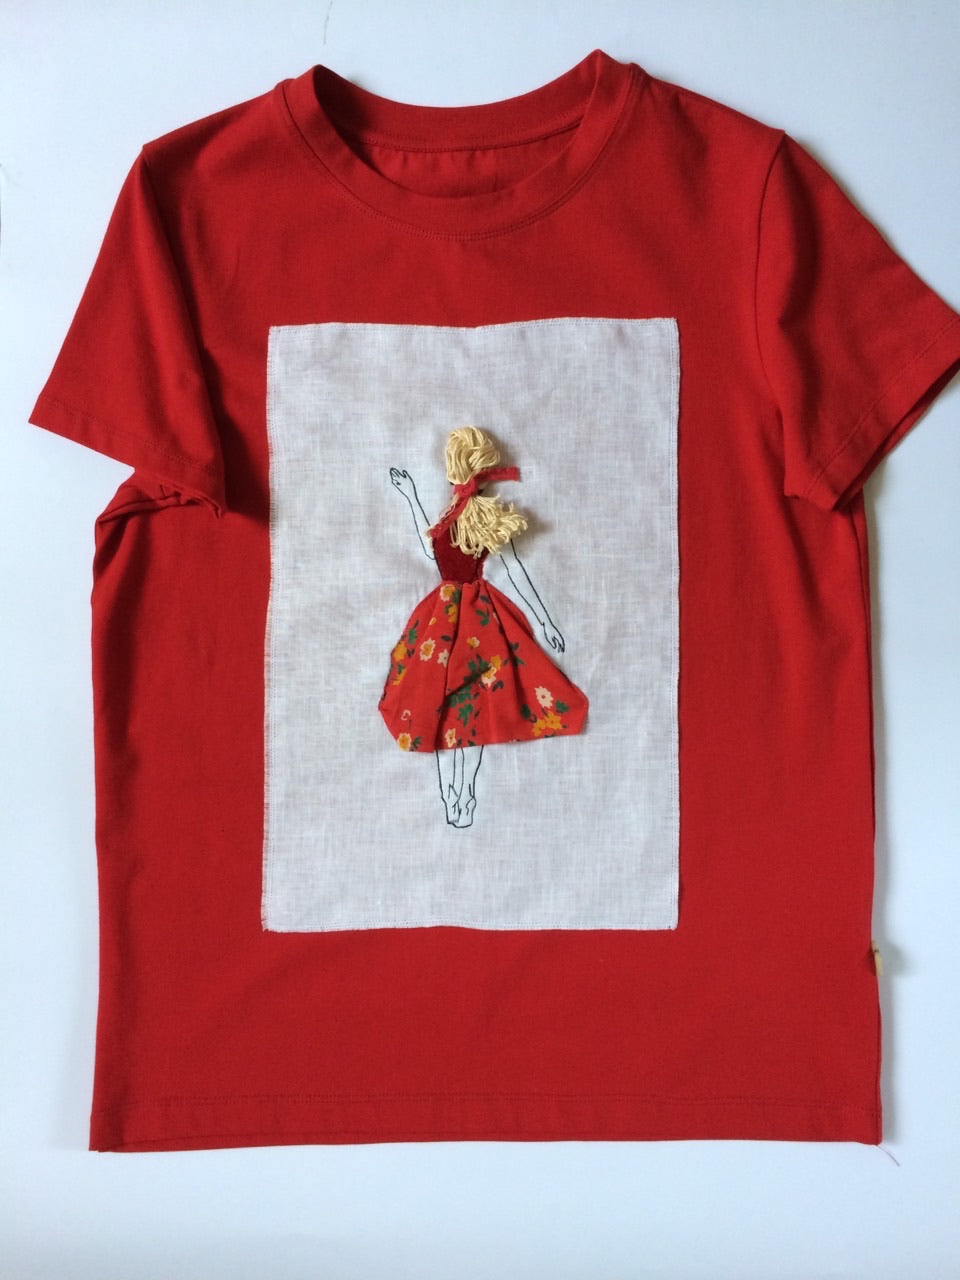 Tshirt with Blond lady in Red